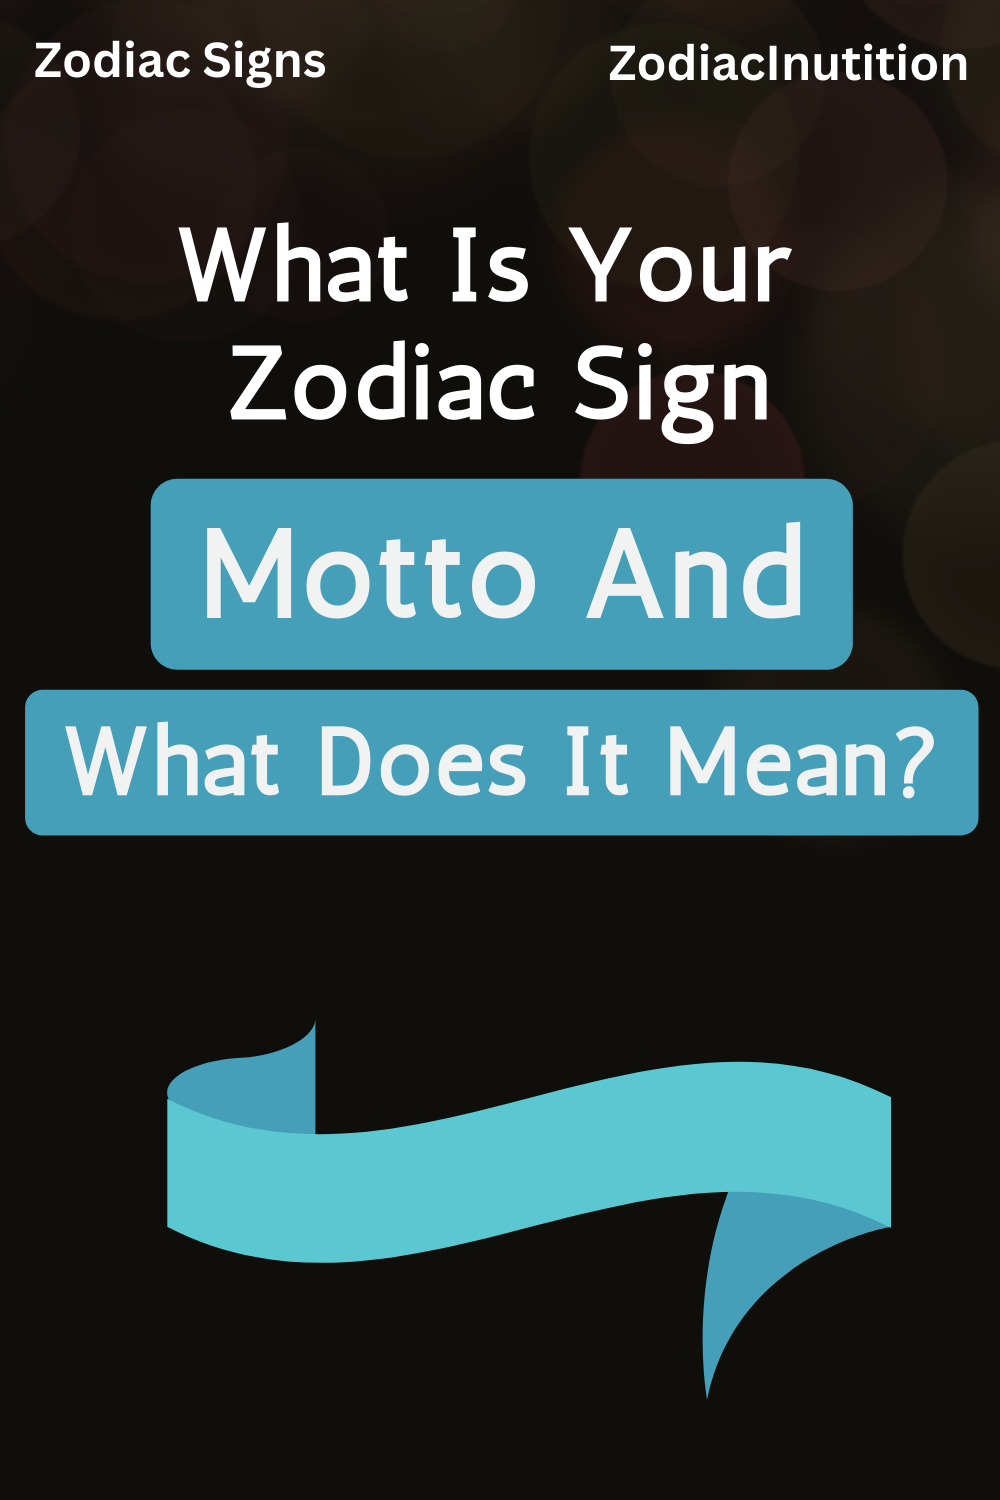 What Is Your Zodiac Sign Motto And What Does It Mean?